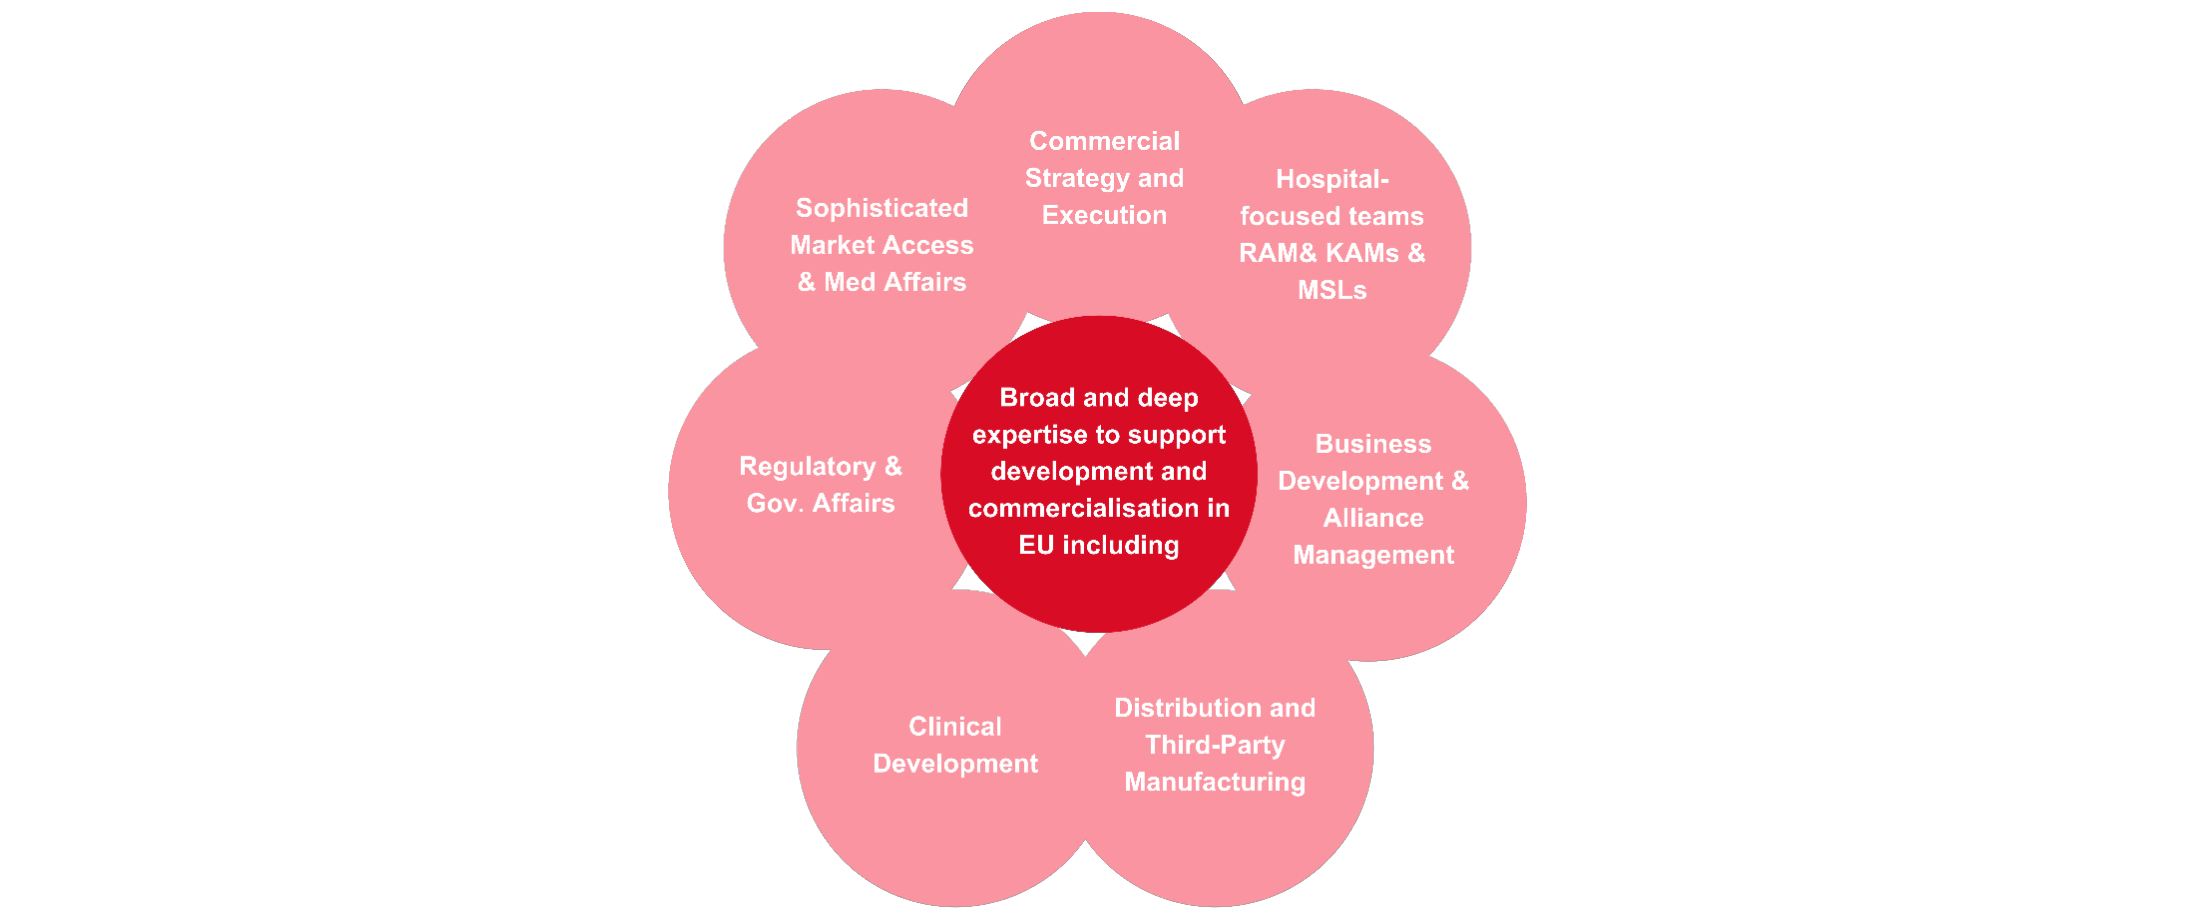 Broad and deep expertise to support development and commercialistion in EU including: Commercial Strategy and Execution; Hospital-focused teams RAMs & KAMs & MSLs; Business Development & Alliance Management; Distribution and Third-Party Manufacturing; Clinical Development; Regulatory & Gov. Affairs; Sophisticated Market Access & Med Affairs.